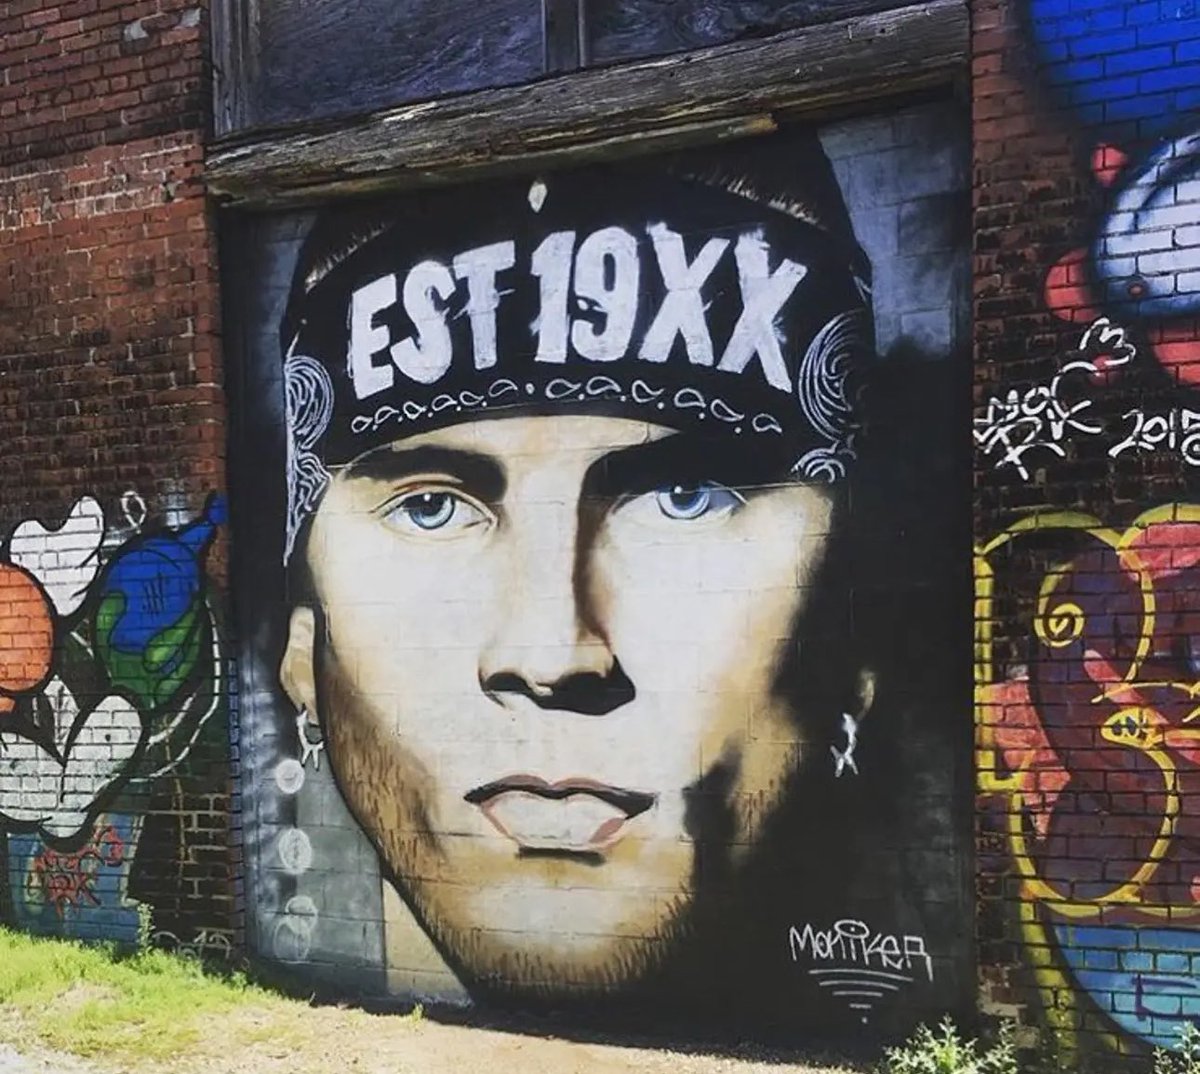 Incredible mgk graffiti in KC. 

I gotta go out and find this.